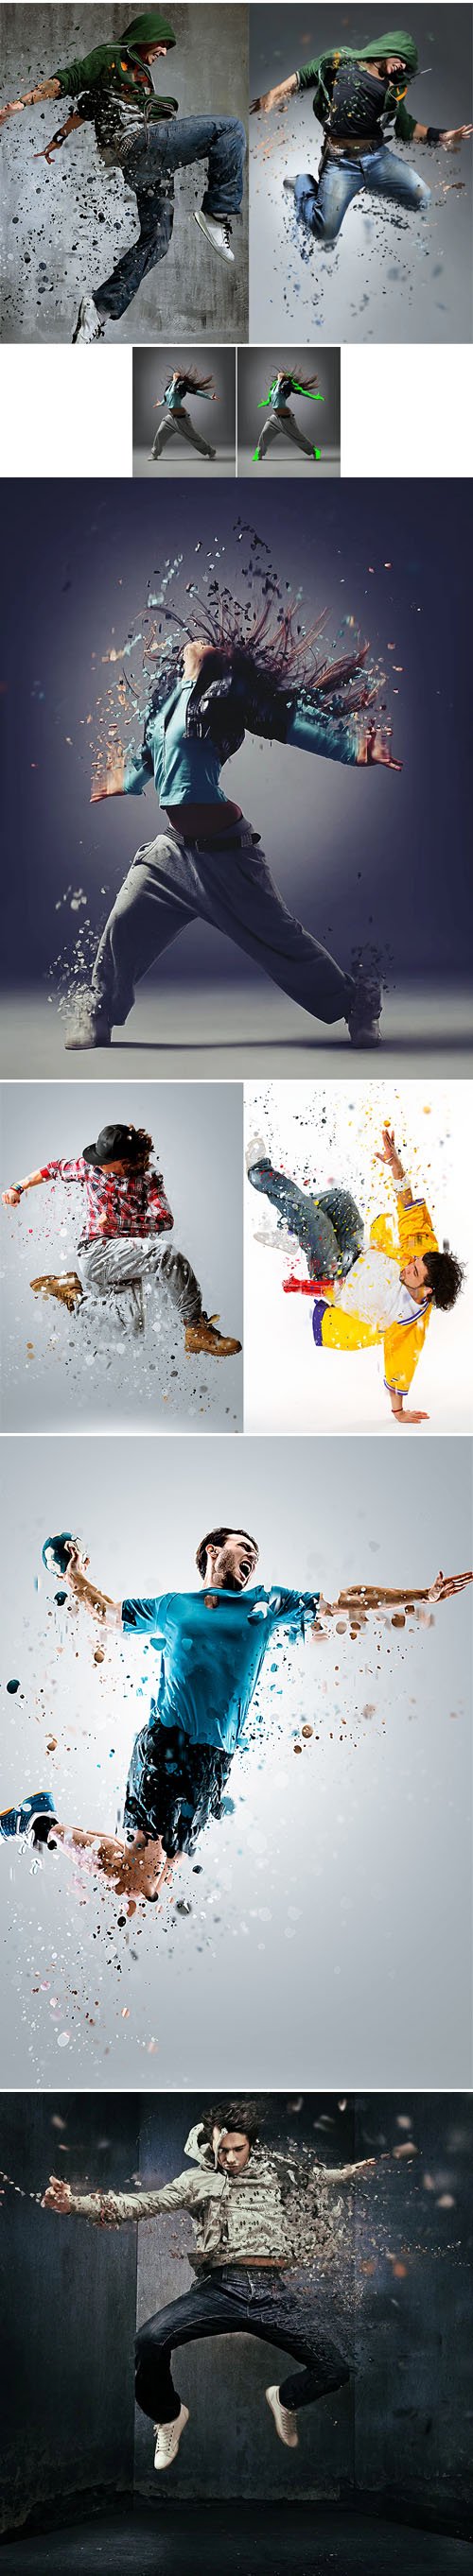 Dispersion Action for Photoshop